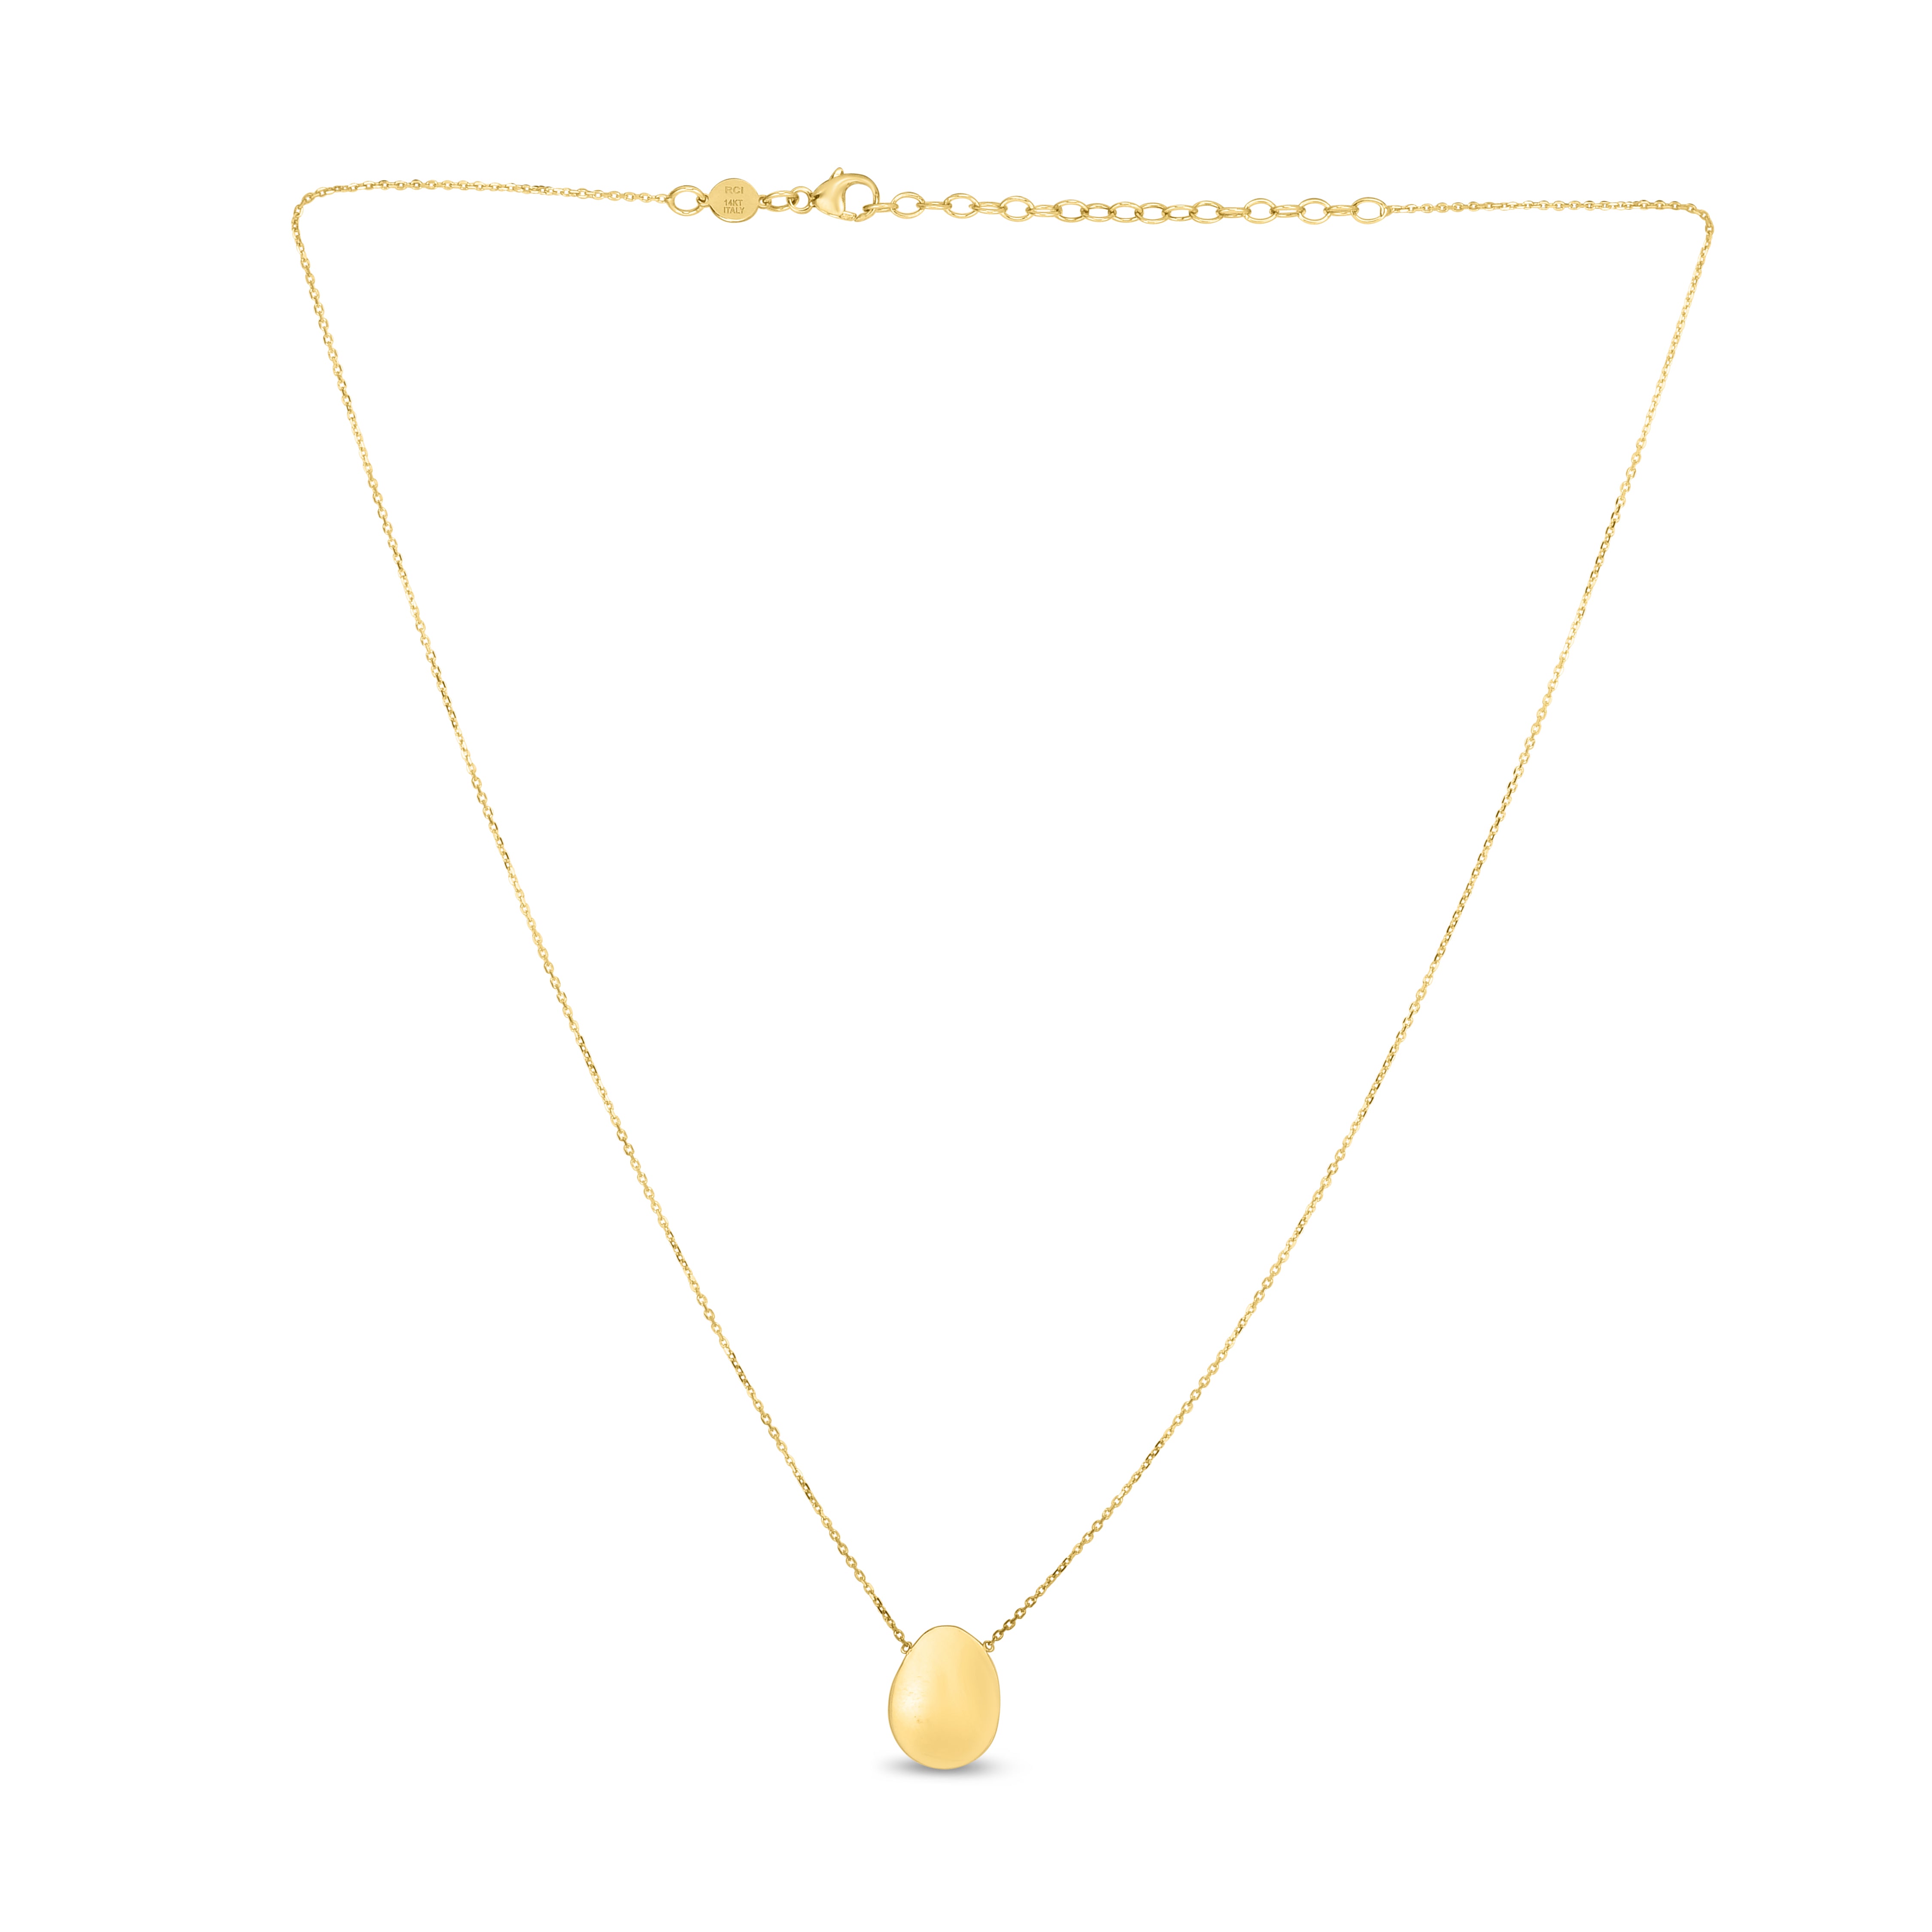 Minimalist 925 Silver And Gold Bean Dainty Necklaces For Women With Unique  European And American Sense Design From Devinebanks, $8.49 | DHgate.Com